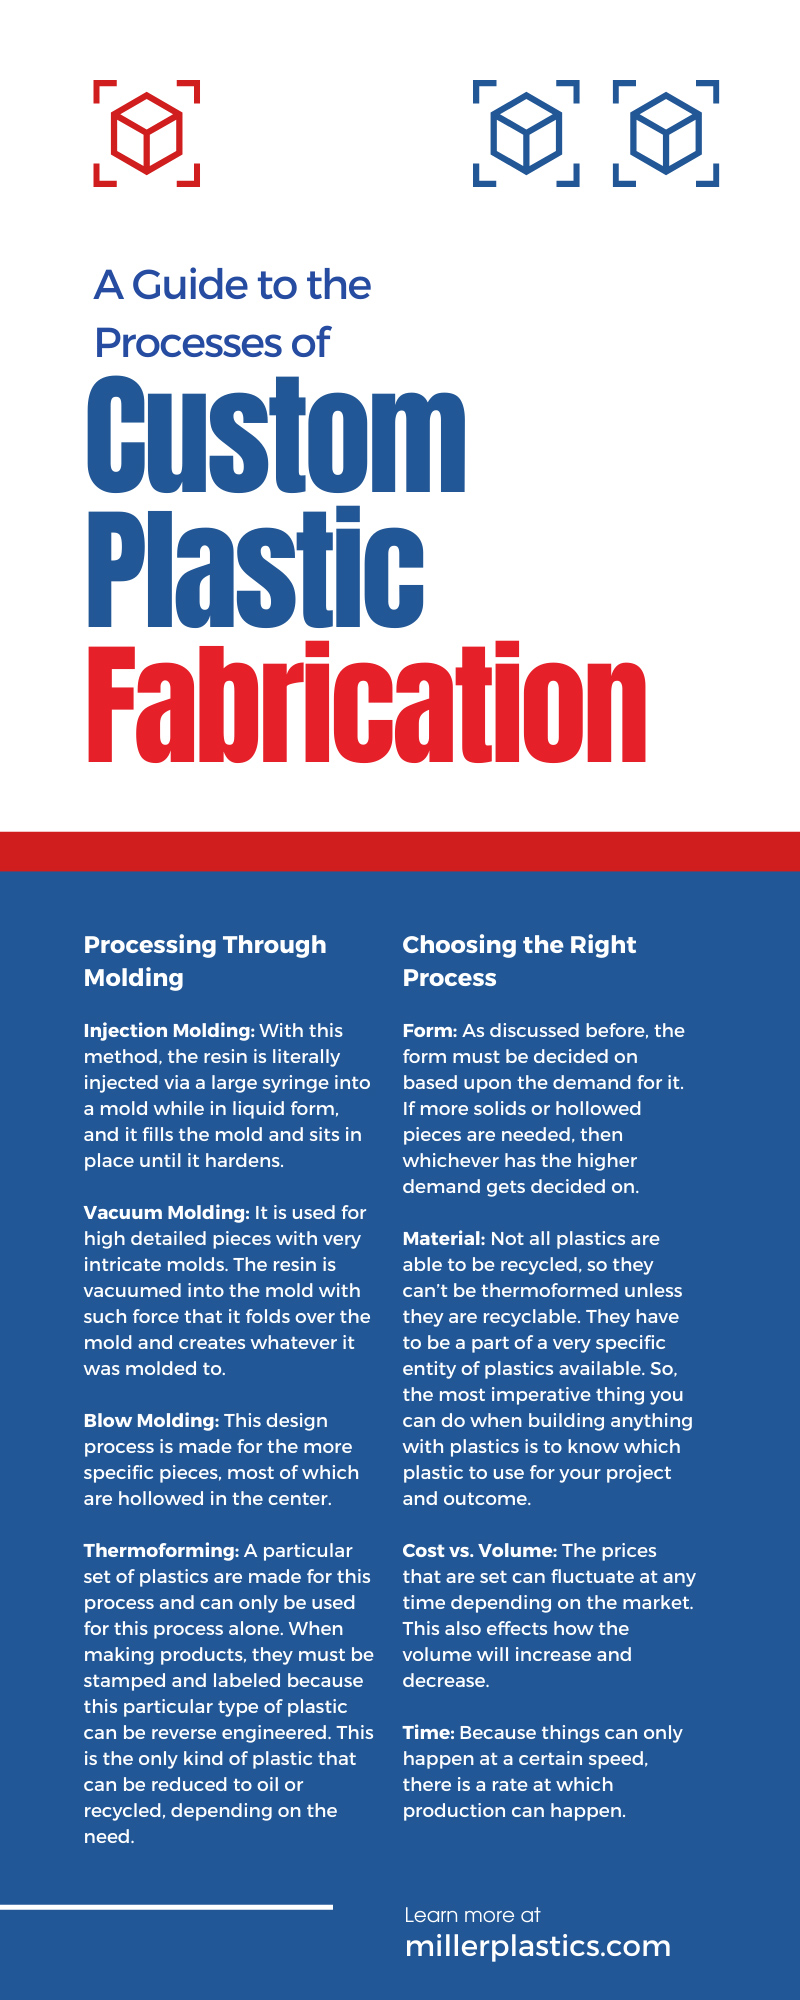 A Guide to the Processes of Custom Plastic Fabrication
